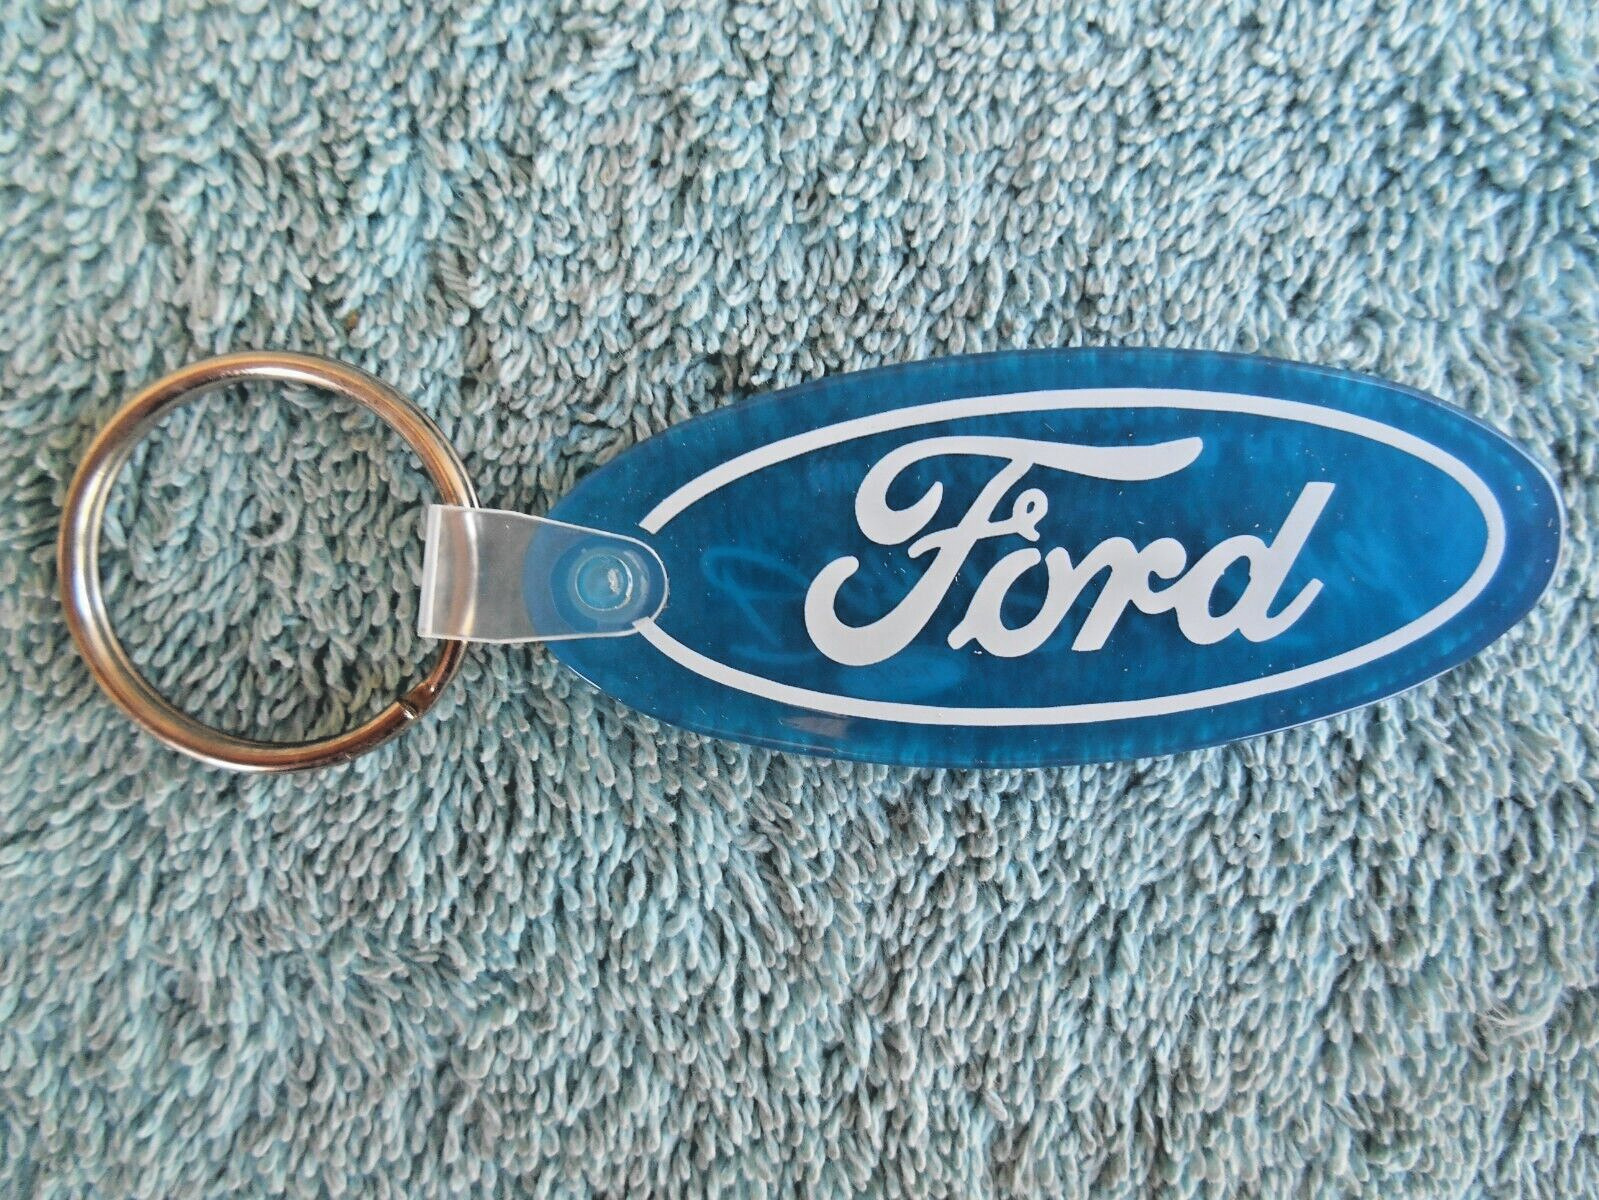 FORD BLUE OVAL RUBBER KEY CHAIN - DON REID FORD MAITLAND, FLORIDA ADVERTISEMENT